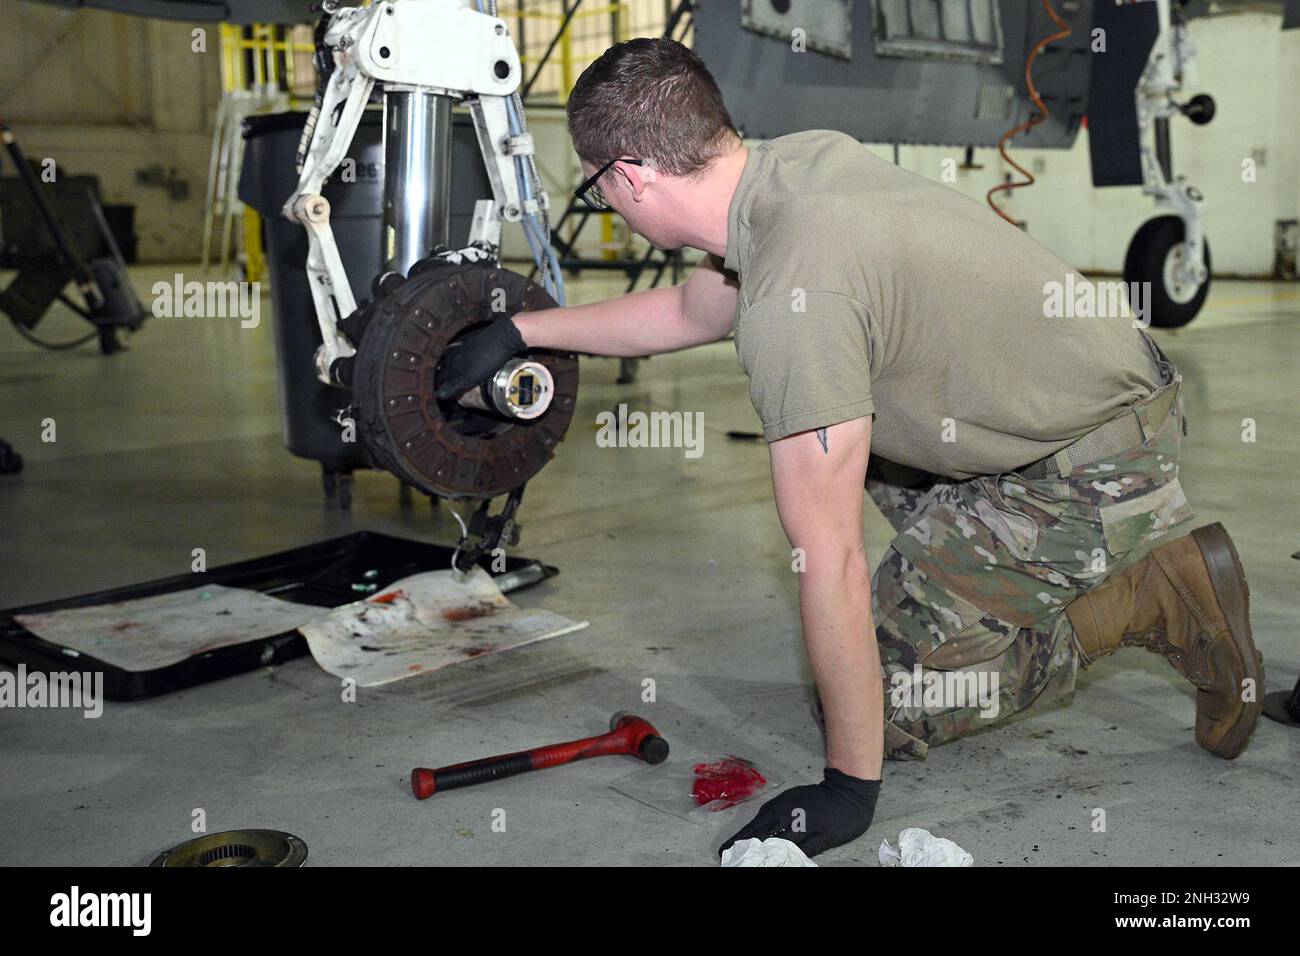 Master Sgt. Keith Hardy, phase work leader, aircraft mechanic, from the 127th Maintenance Squadron, Selfridge Air National Guard Base, Michigan, repack the brake and wheel assembly strut on an A-10 Thunderbolt II during a Phase 1 inspection on Dec. 9, 2022. Airmen of the 127th Maintenance Squadron phase crew are tasked to perform detailed inspections to make sure this complex jet remains air ready. Stock Photo